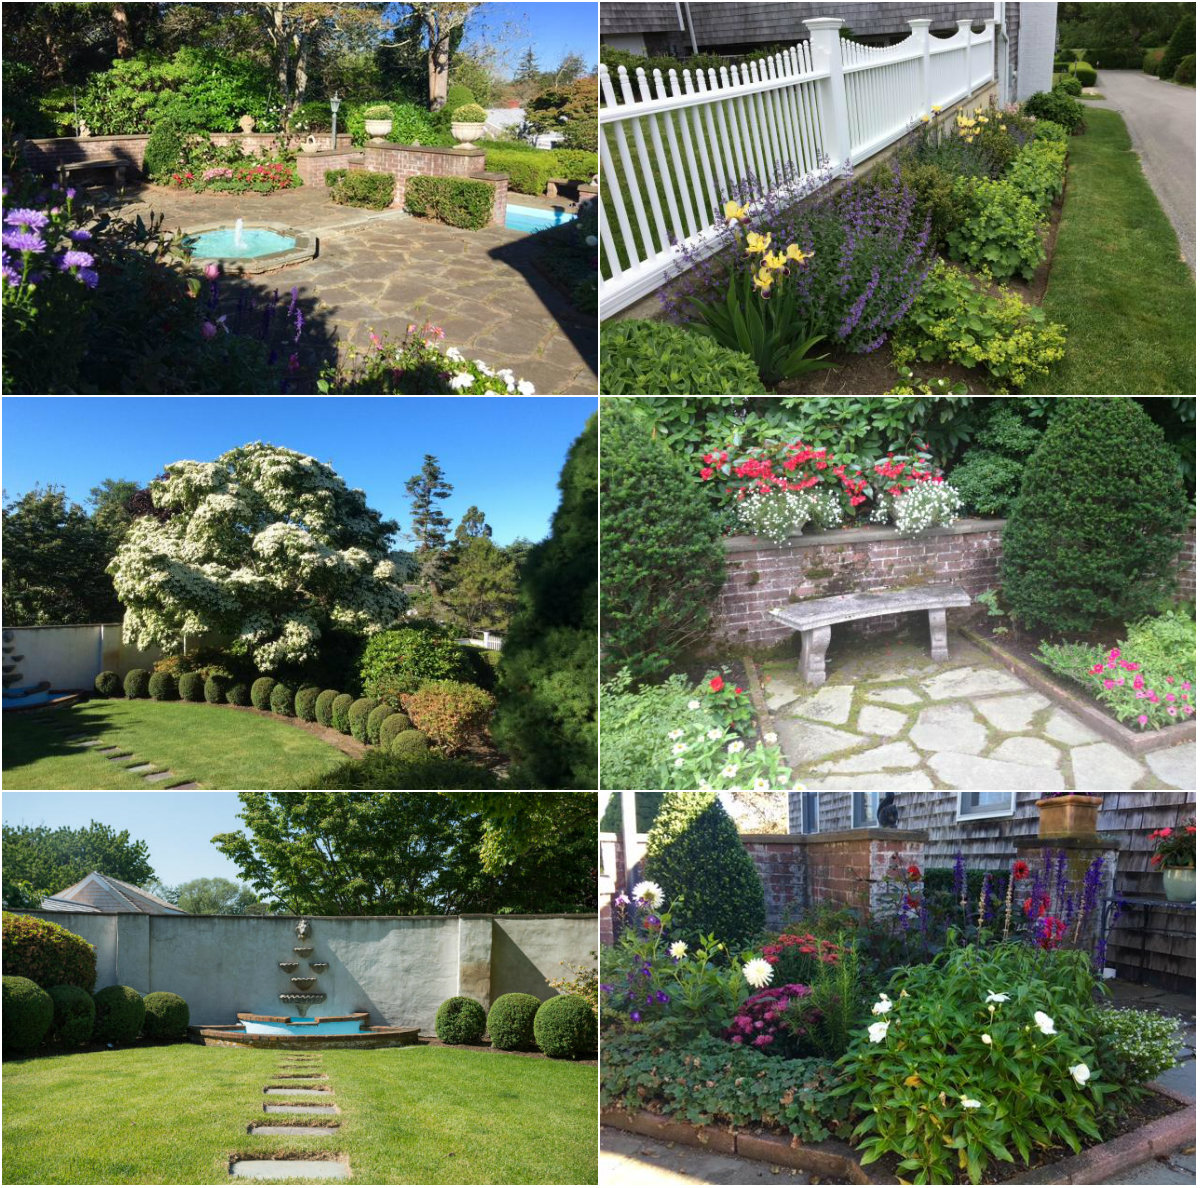 Images of Beautiful Garden at 151 Old Wharf Road in North Chatham Cape Cod, MA